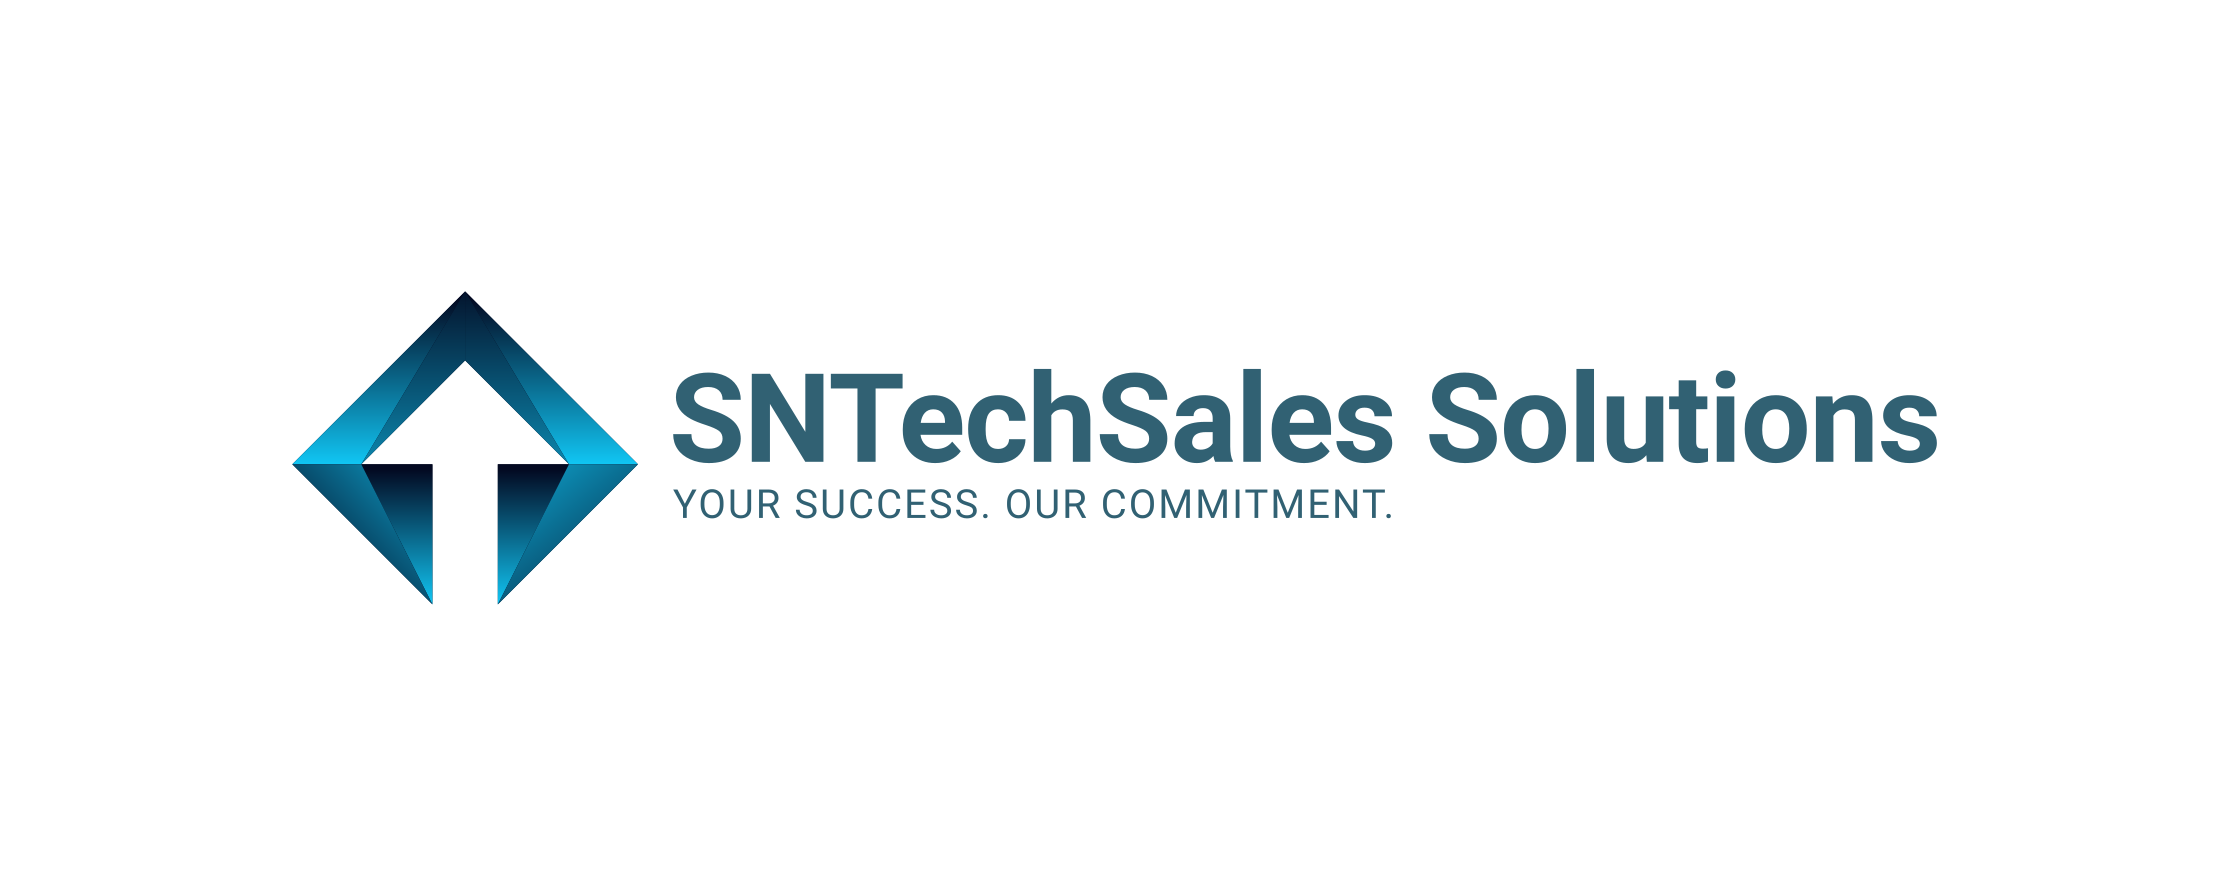 SNTechSales Solutions Logo